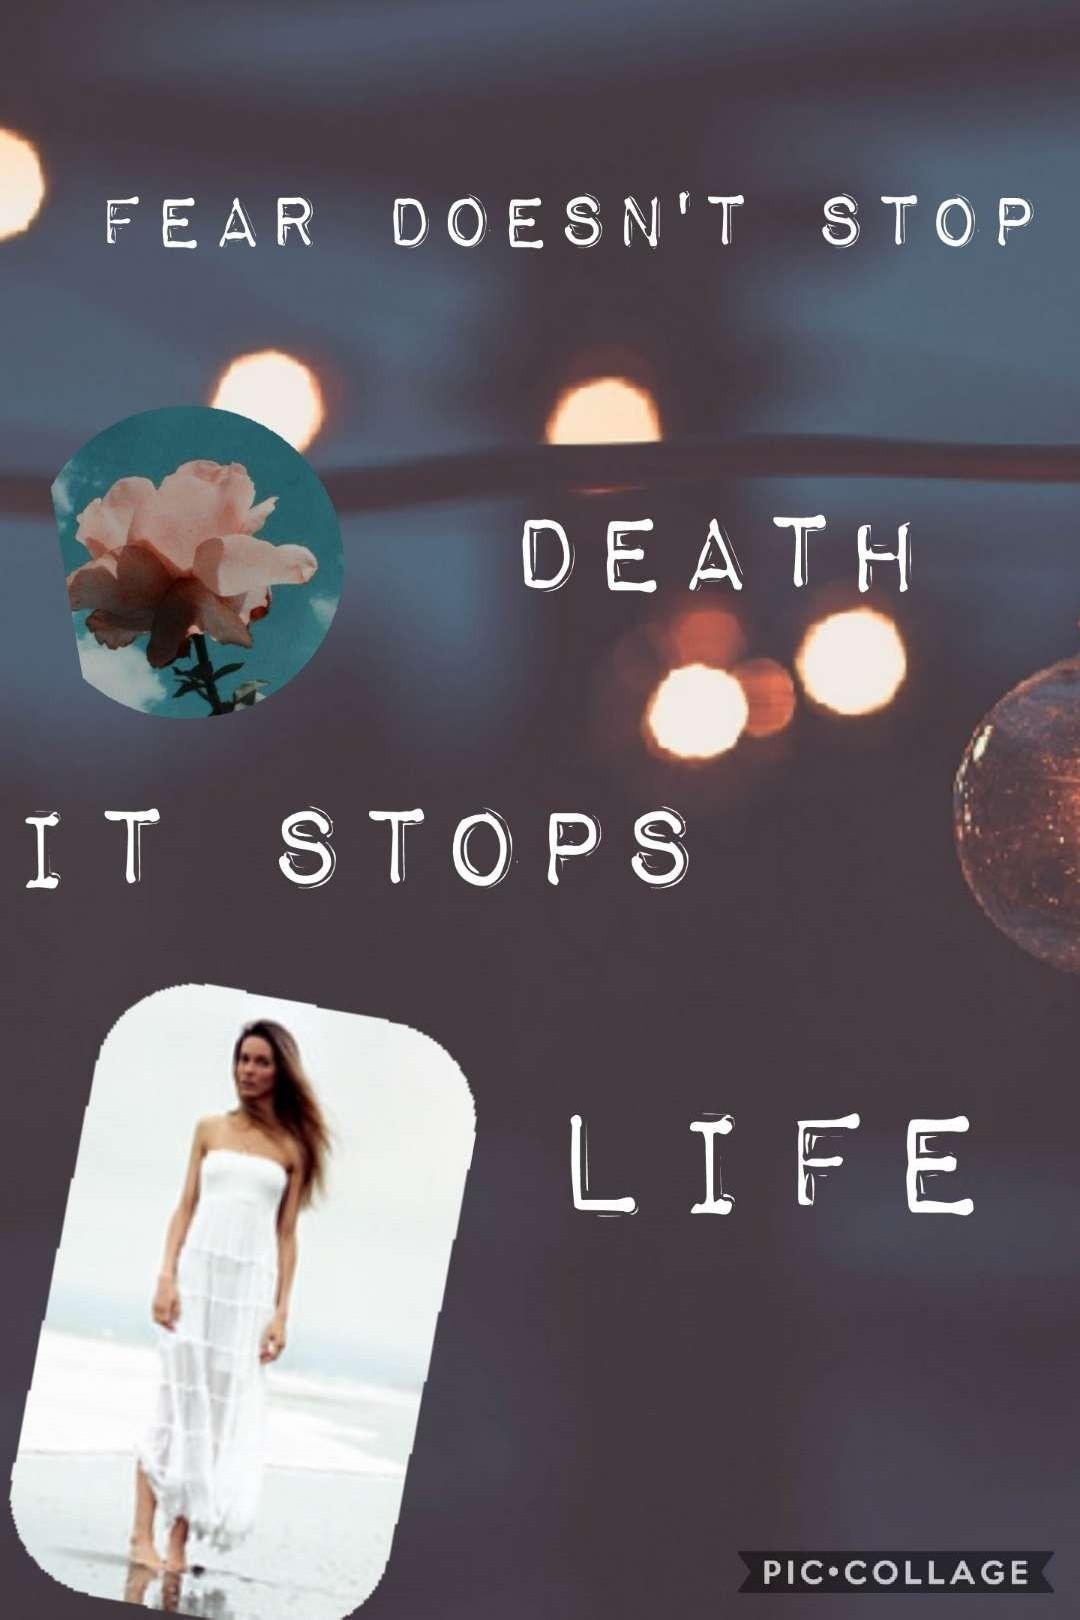  ❤️❤️❤️❤️❤️❤️❤️TAP❤️❤️❤️❤️❤️❤️❤️❤️.        as simple as the collage as simple as the quote enjoy life. stop thinking about death.